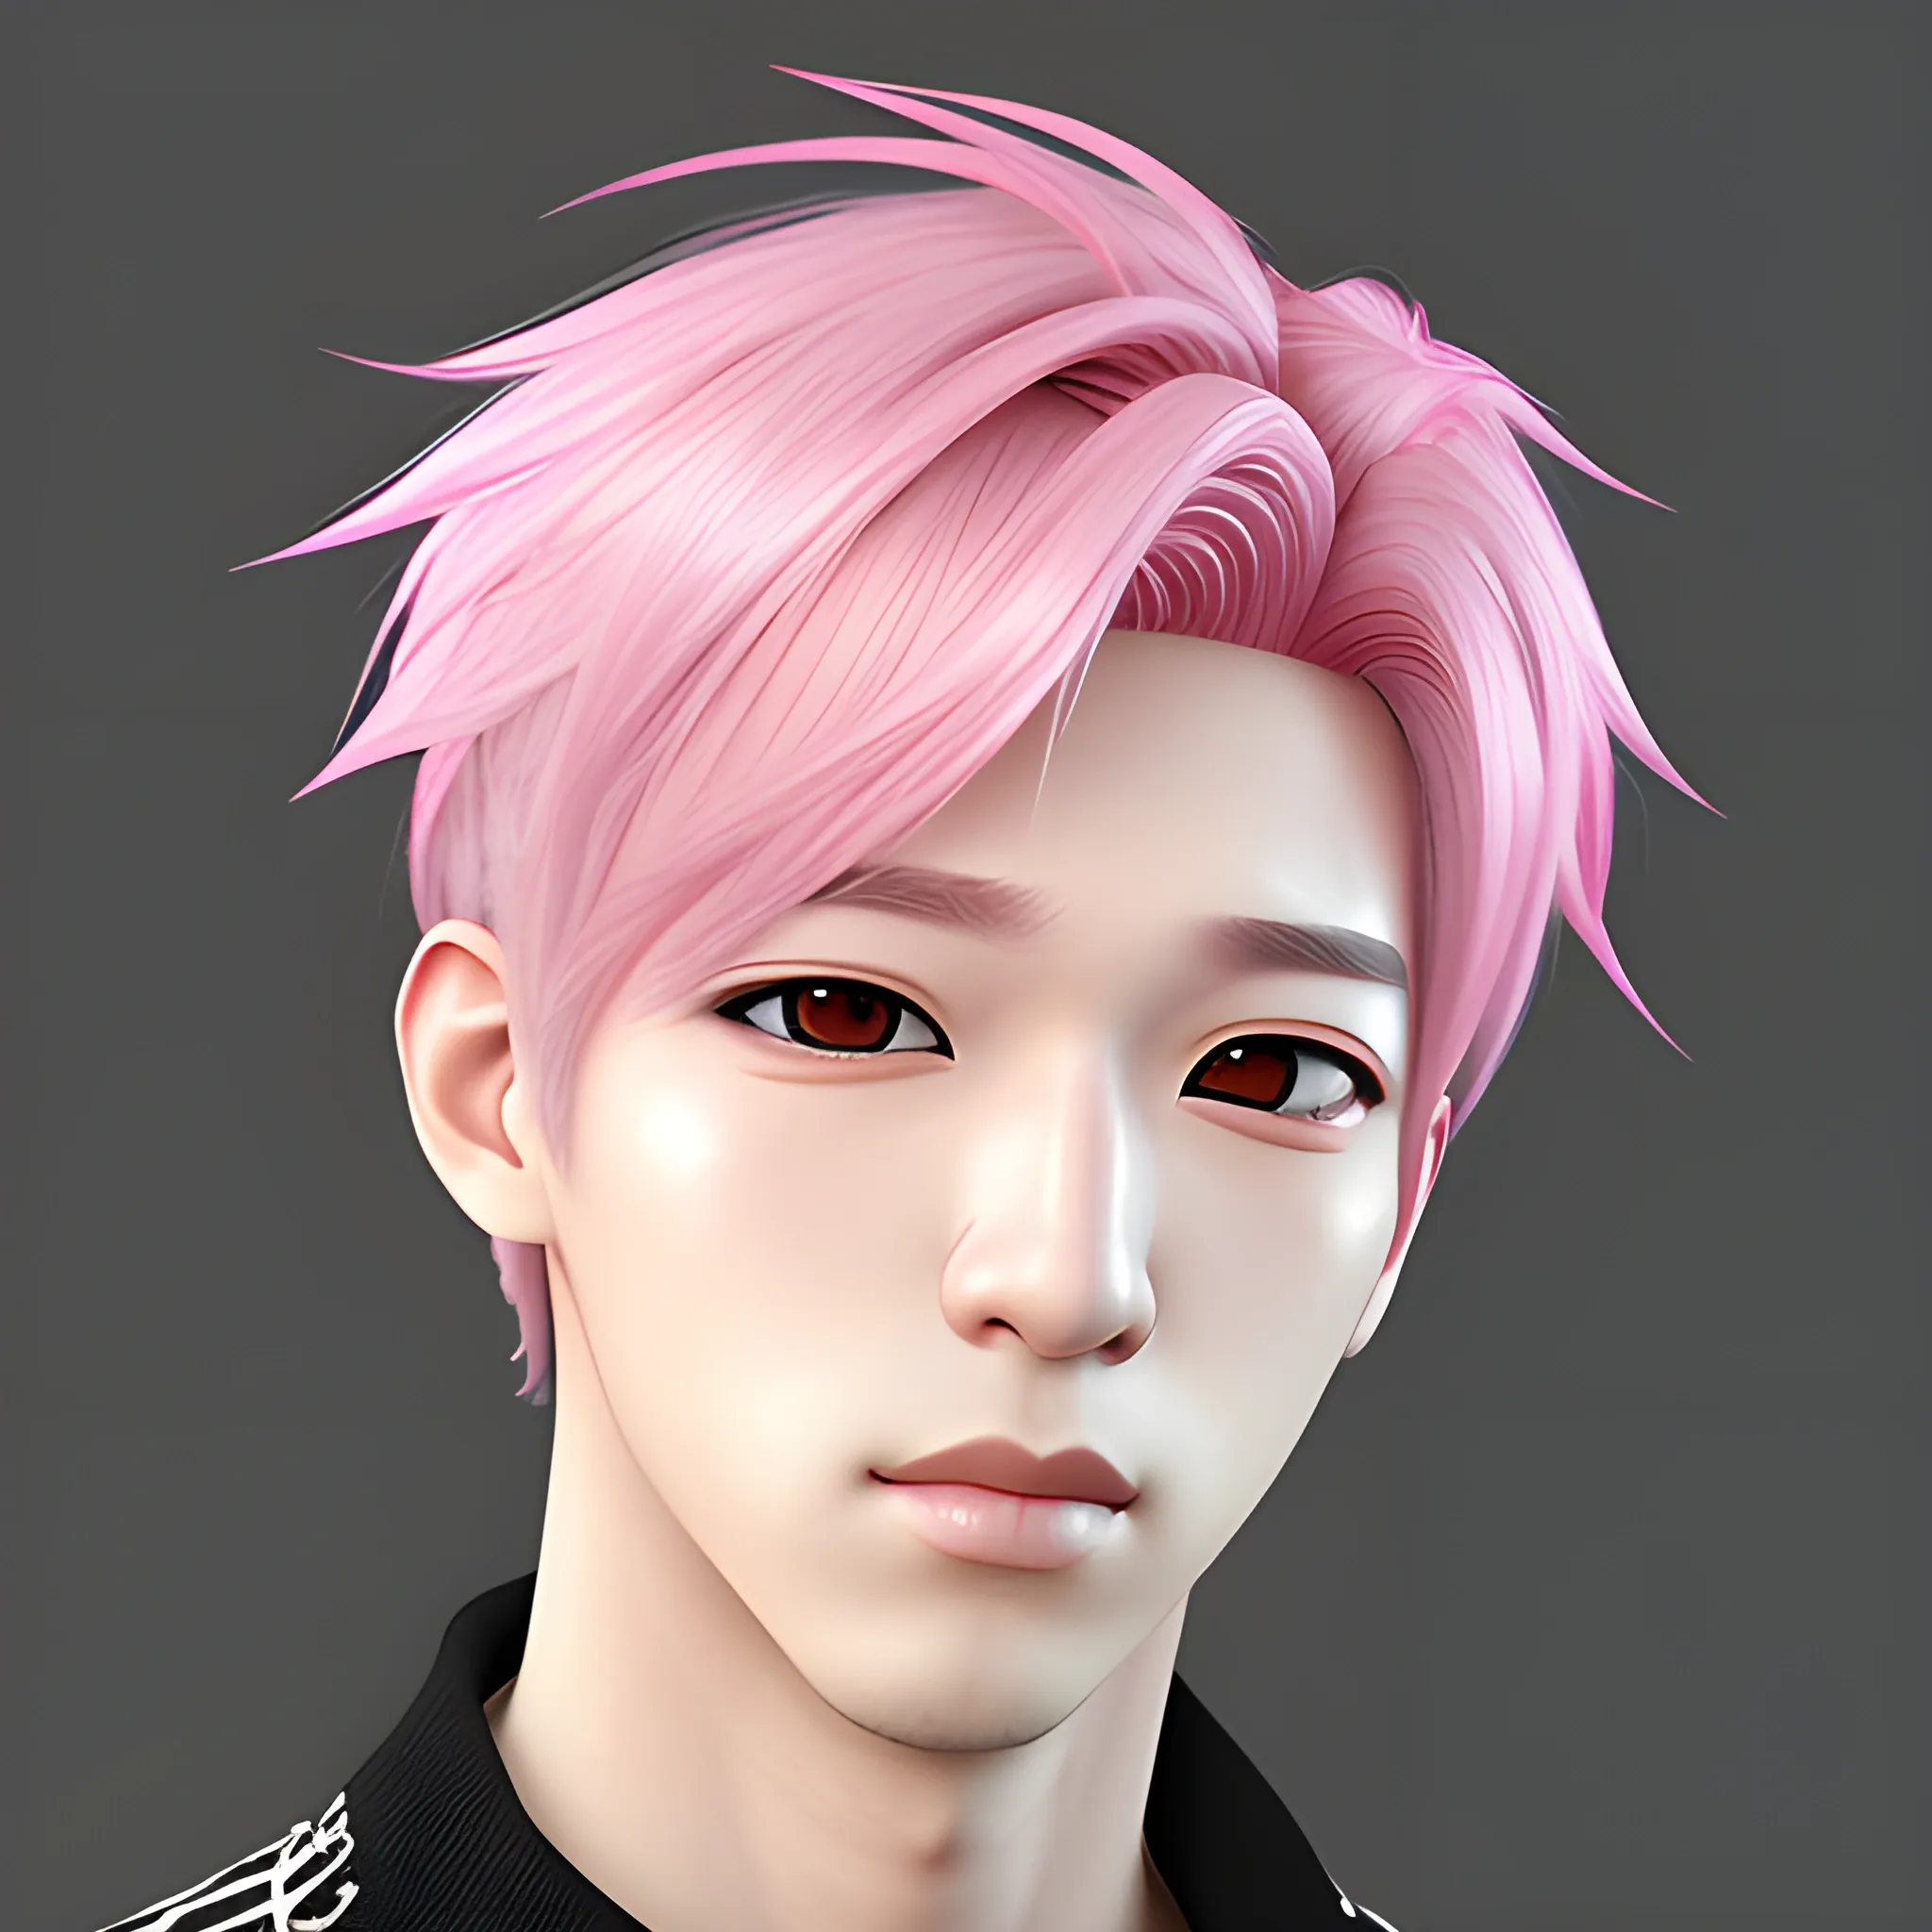 male character, cute, pink hair, k pop idol style, realistic paint, 3d